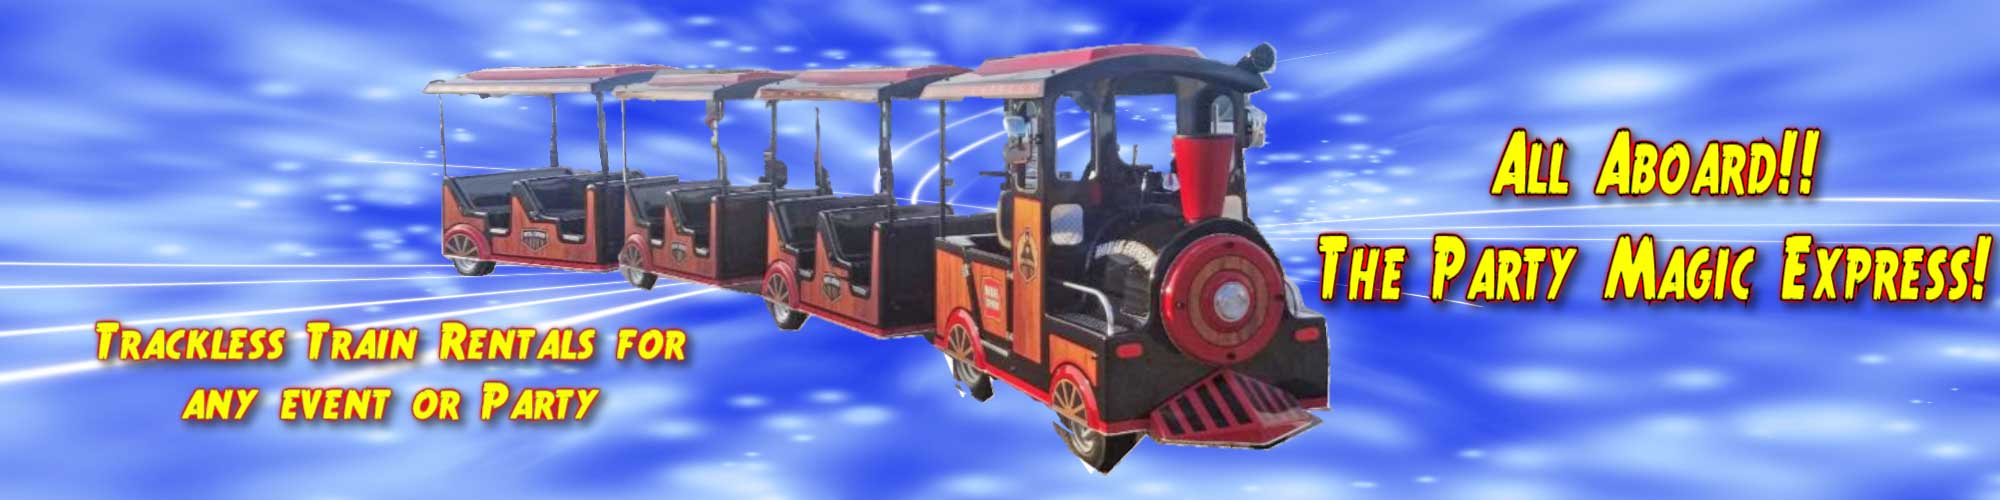 Trackless Train Rentals in Fort Worth Tx